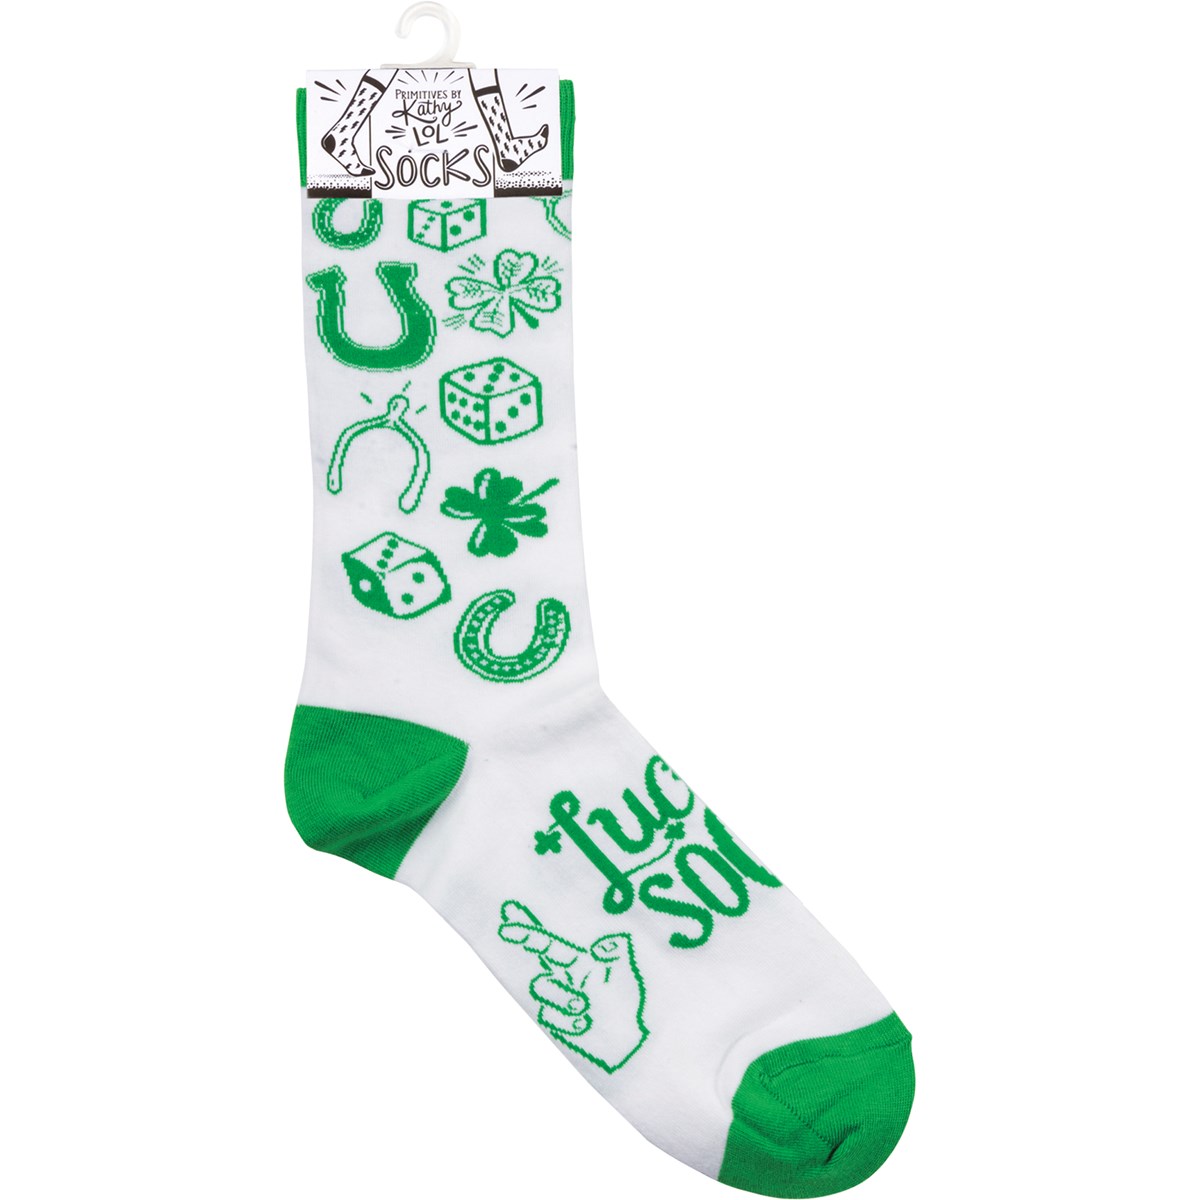 Socks - Lucky - One Size Fits Most - Cotton, Nylon, Spandex